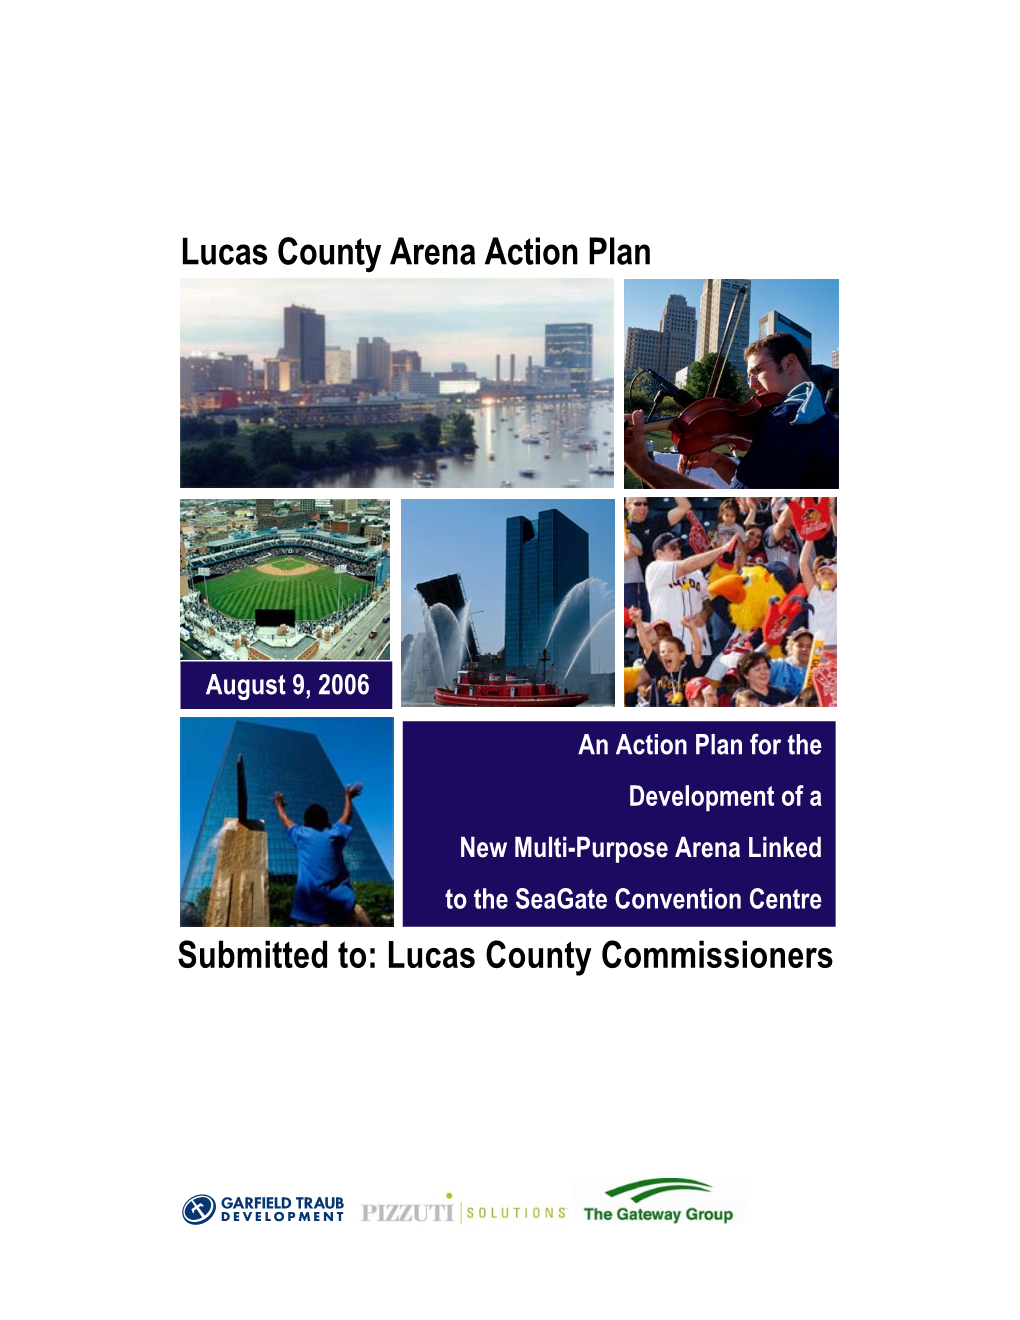 Lucas County Arena Action Plan Submitted To: Lucas County